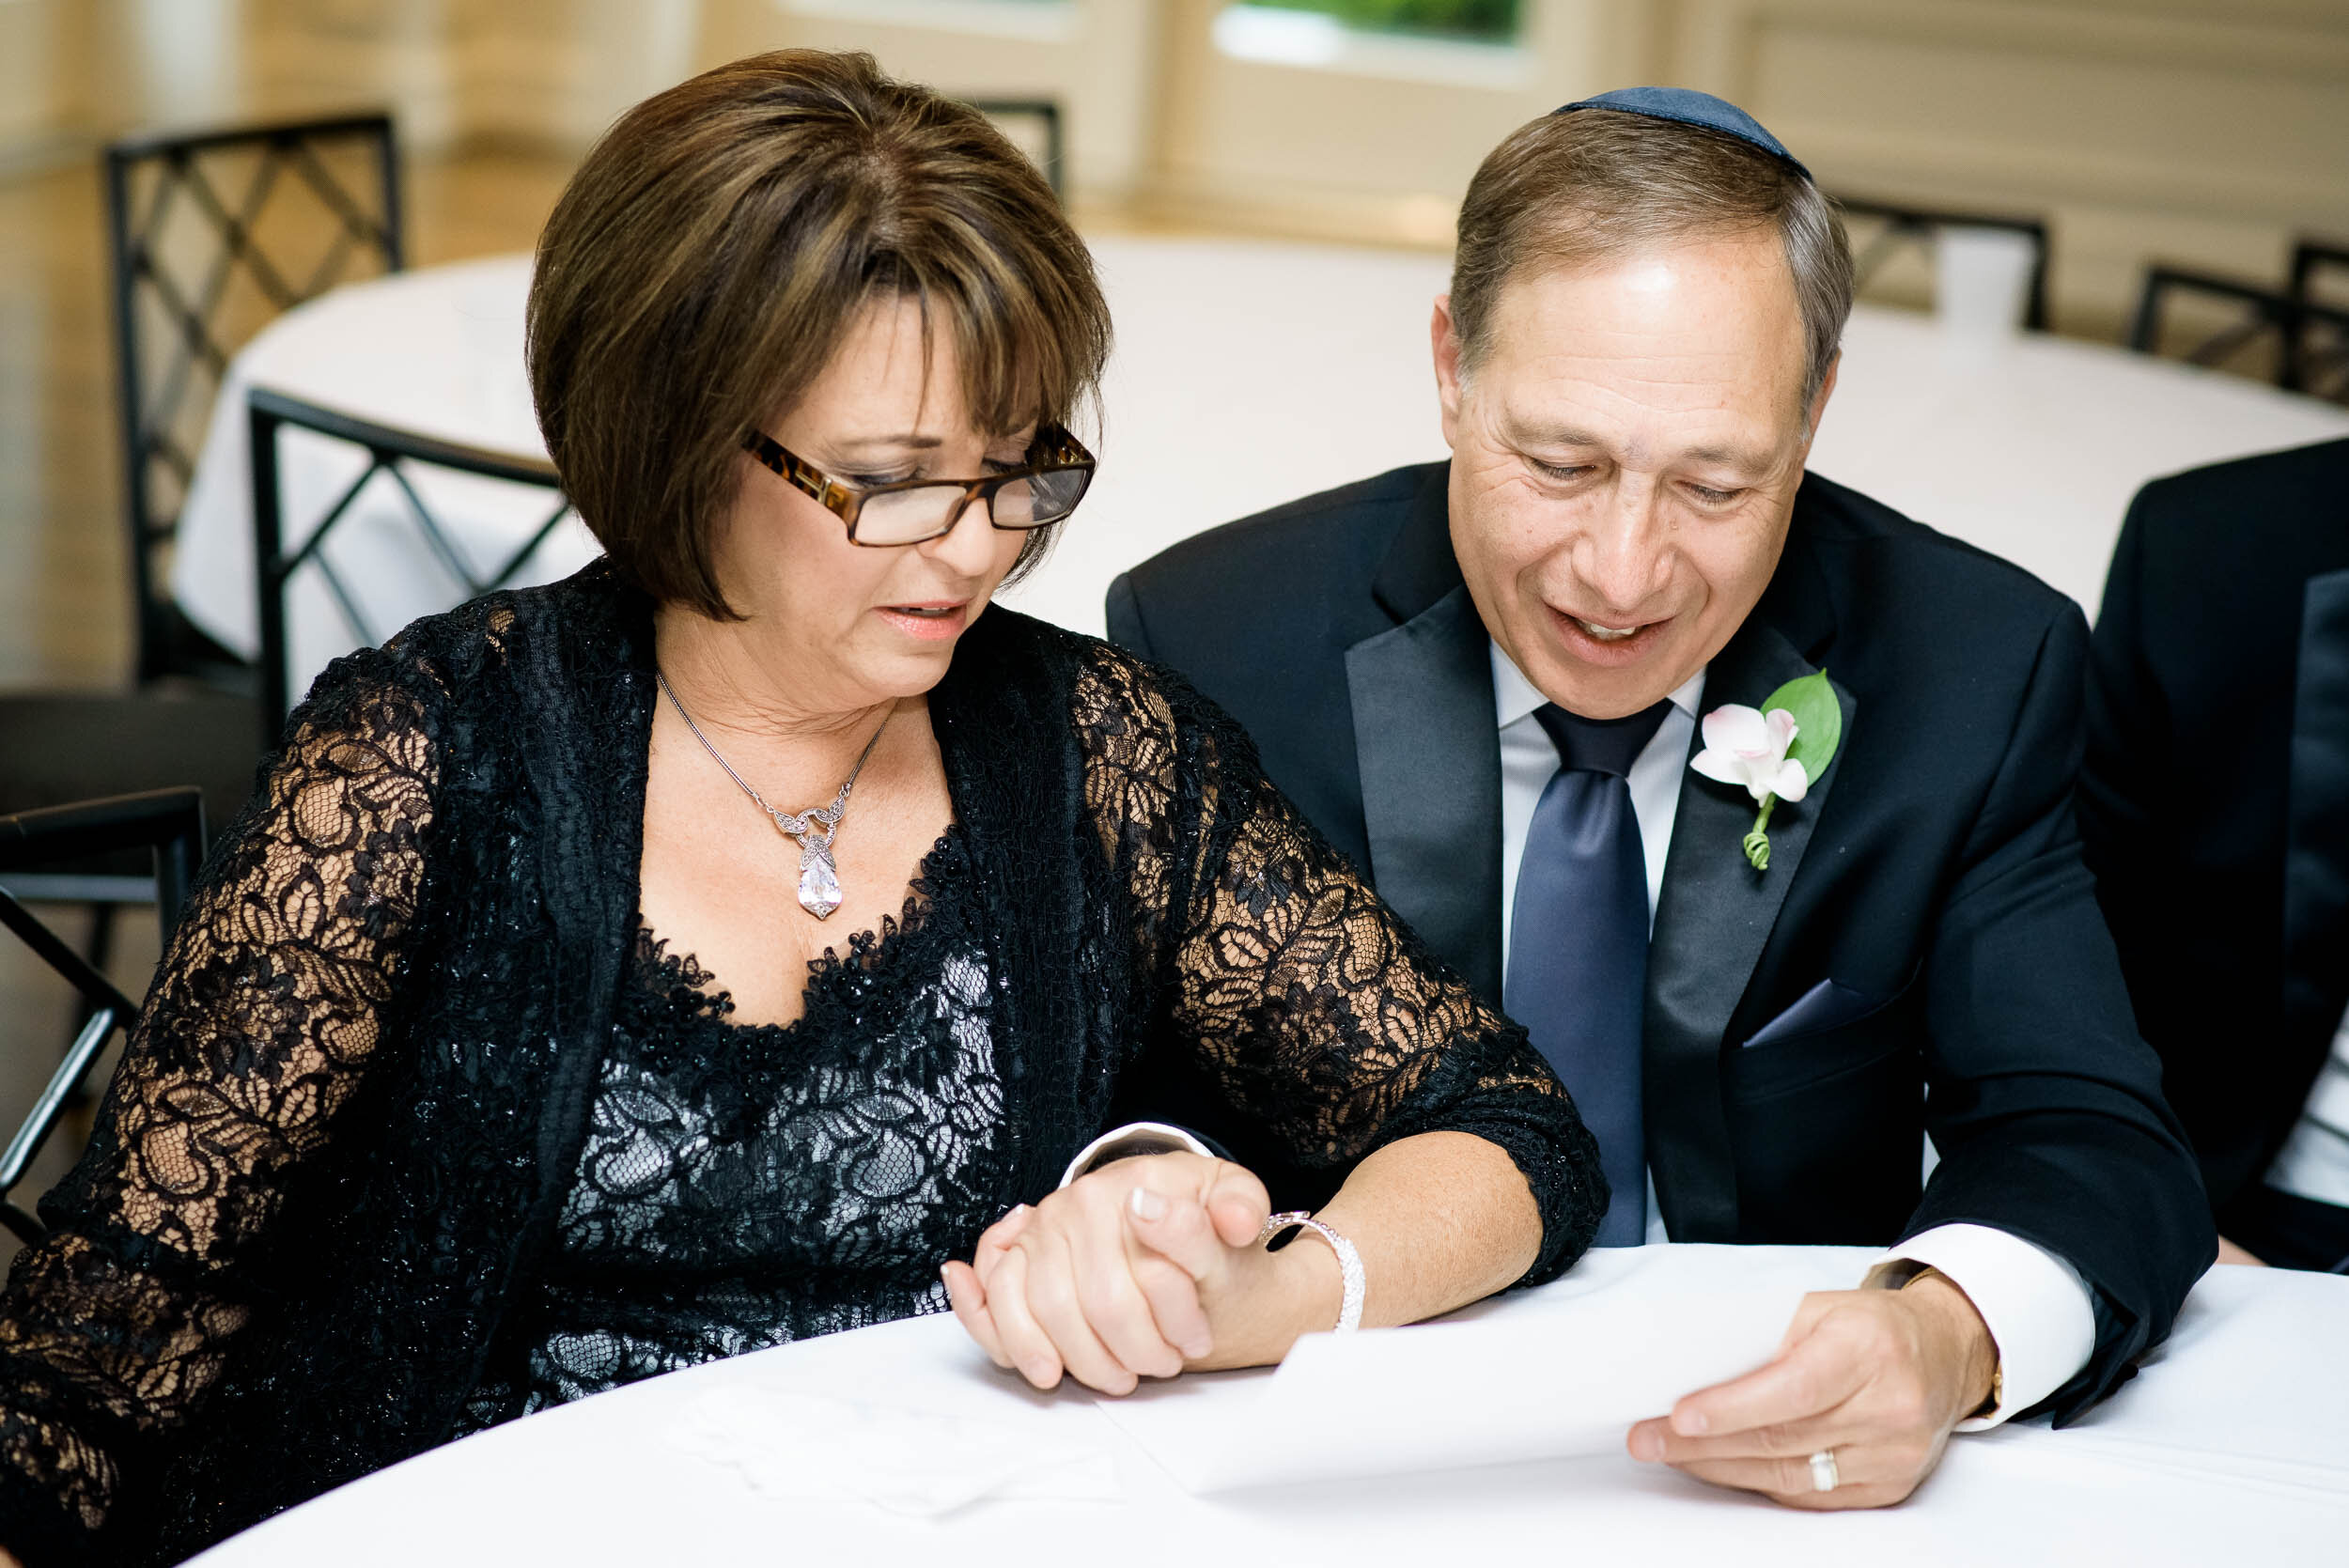 Parents of groom at jewish wedding ketubah signing during a Chevy Chase Country Club wedding by J. Brown Photography.